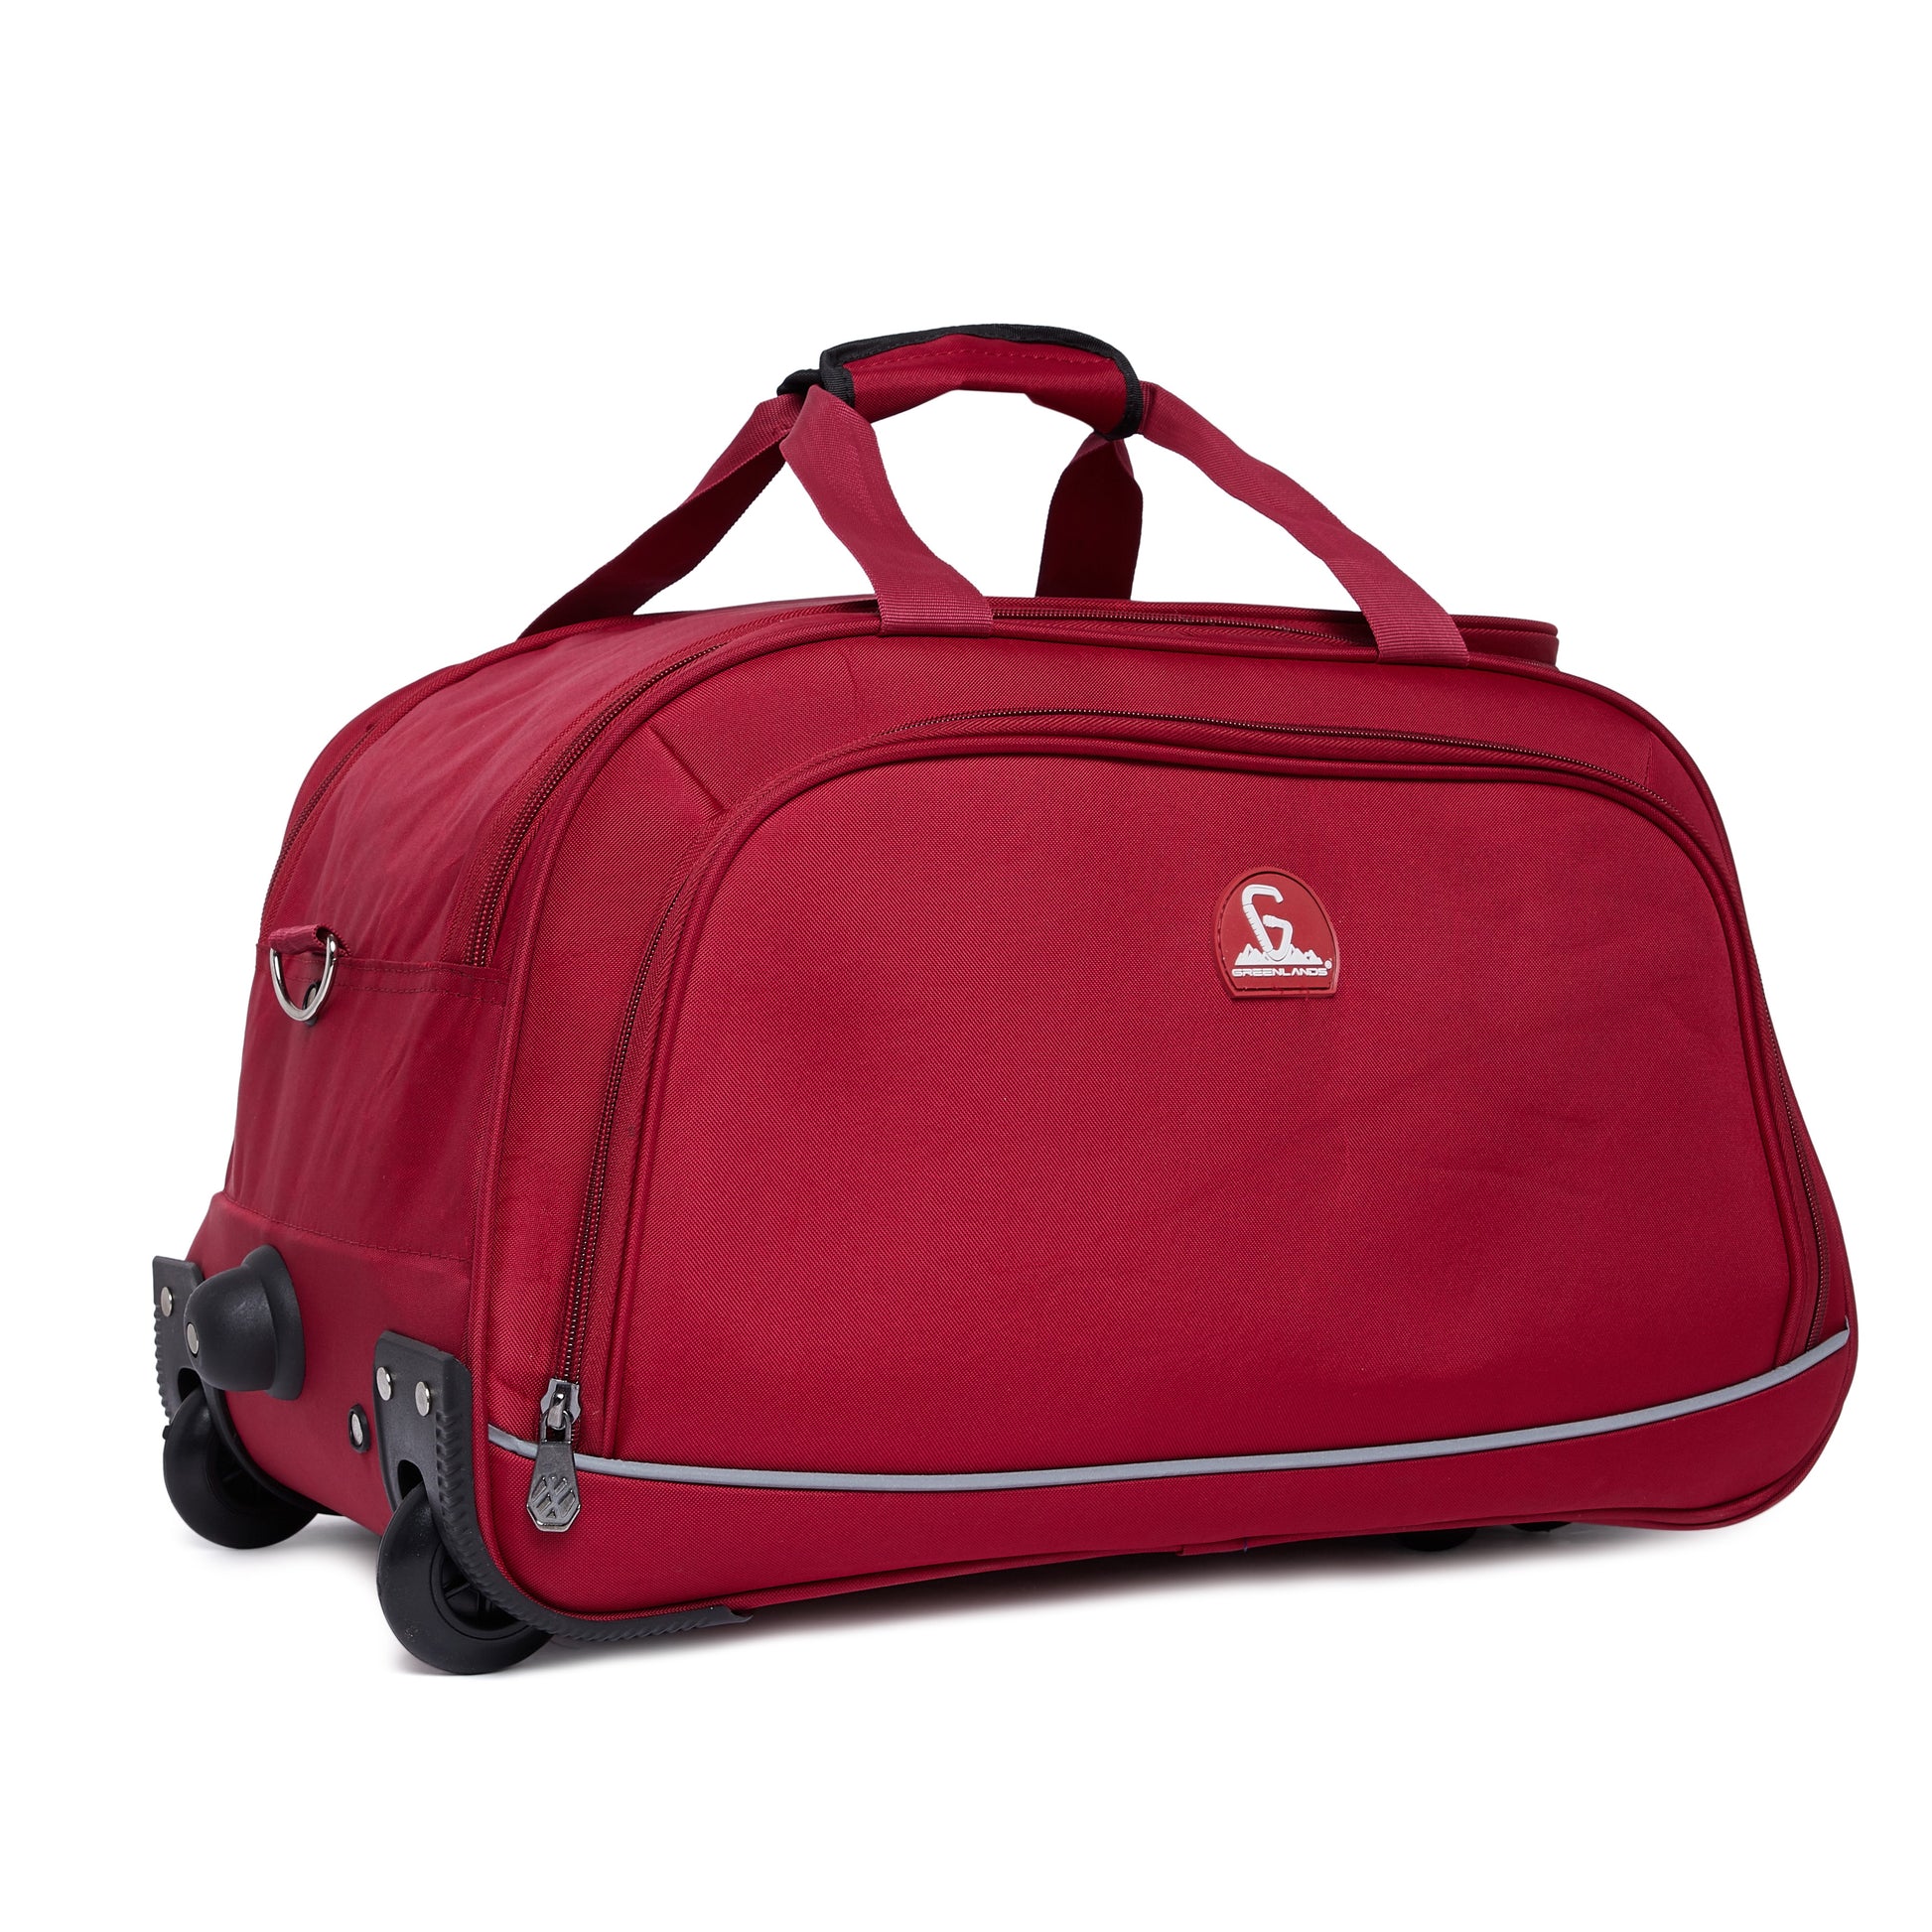 Greenlands Nifty Duffle Bag 45 ltr - Red